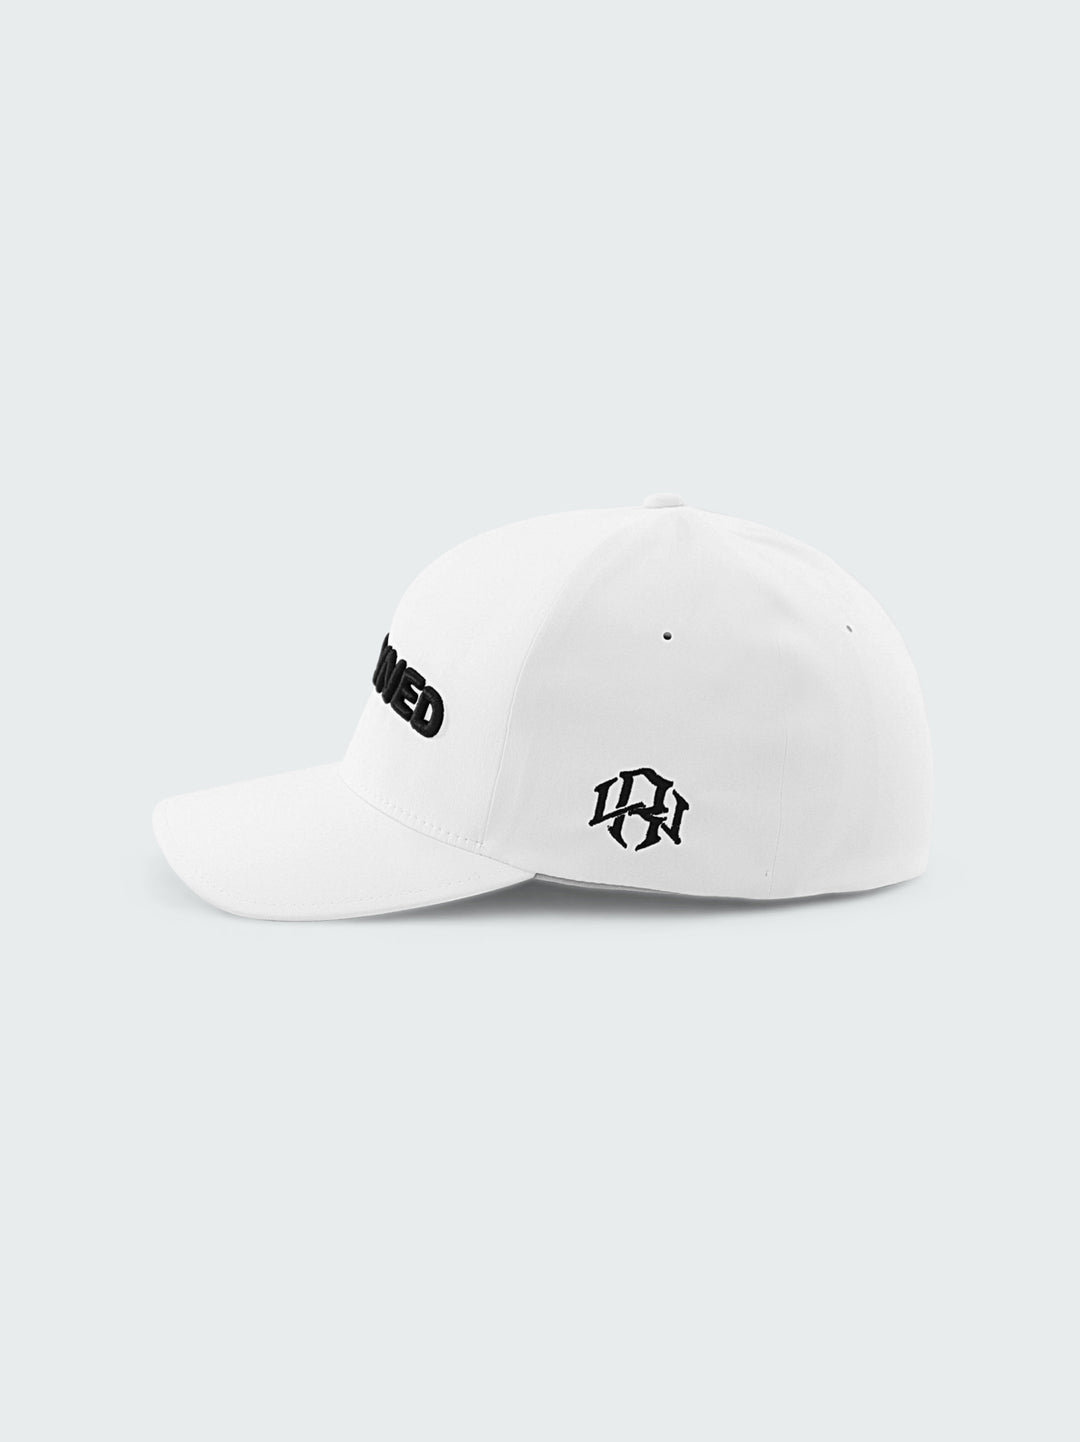 6 panel White Cap by RENOWNED WEAR with front Black Lettering 3D Embroidery and side left side logo.